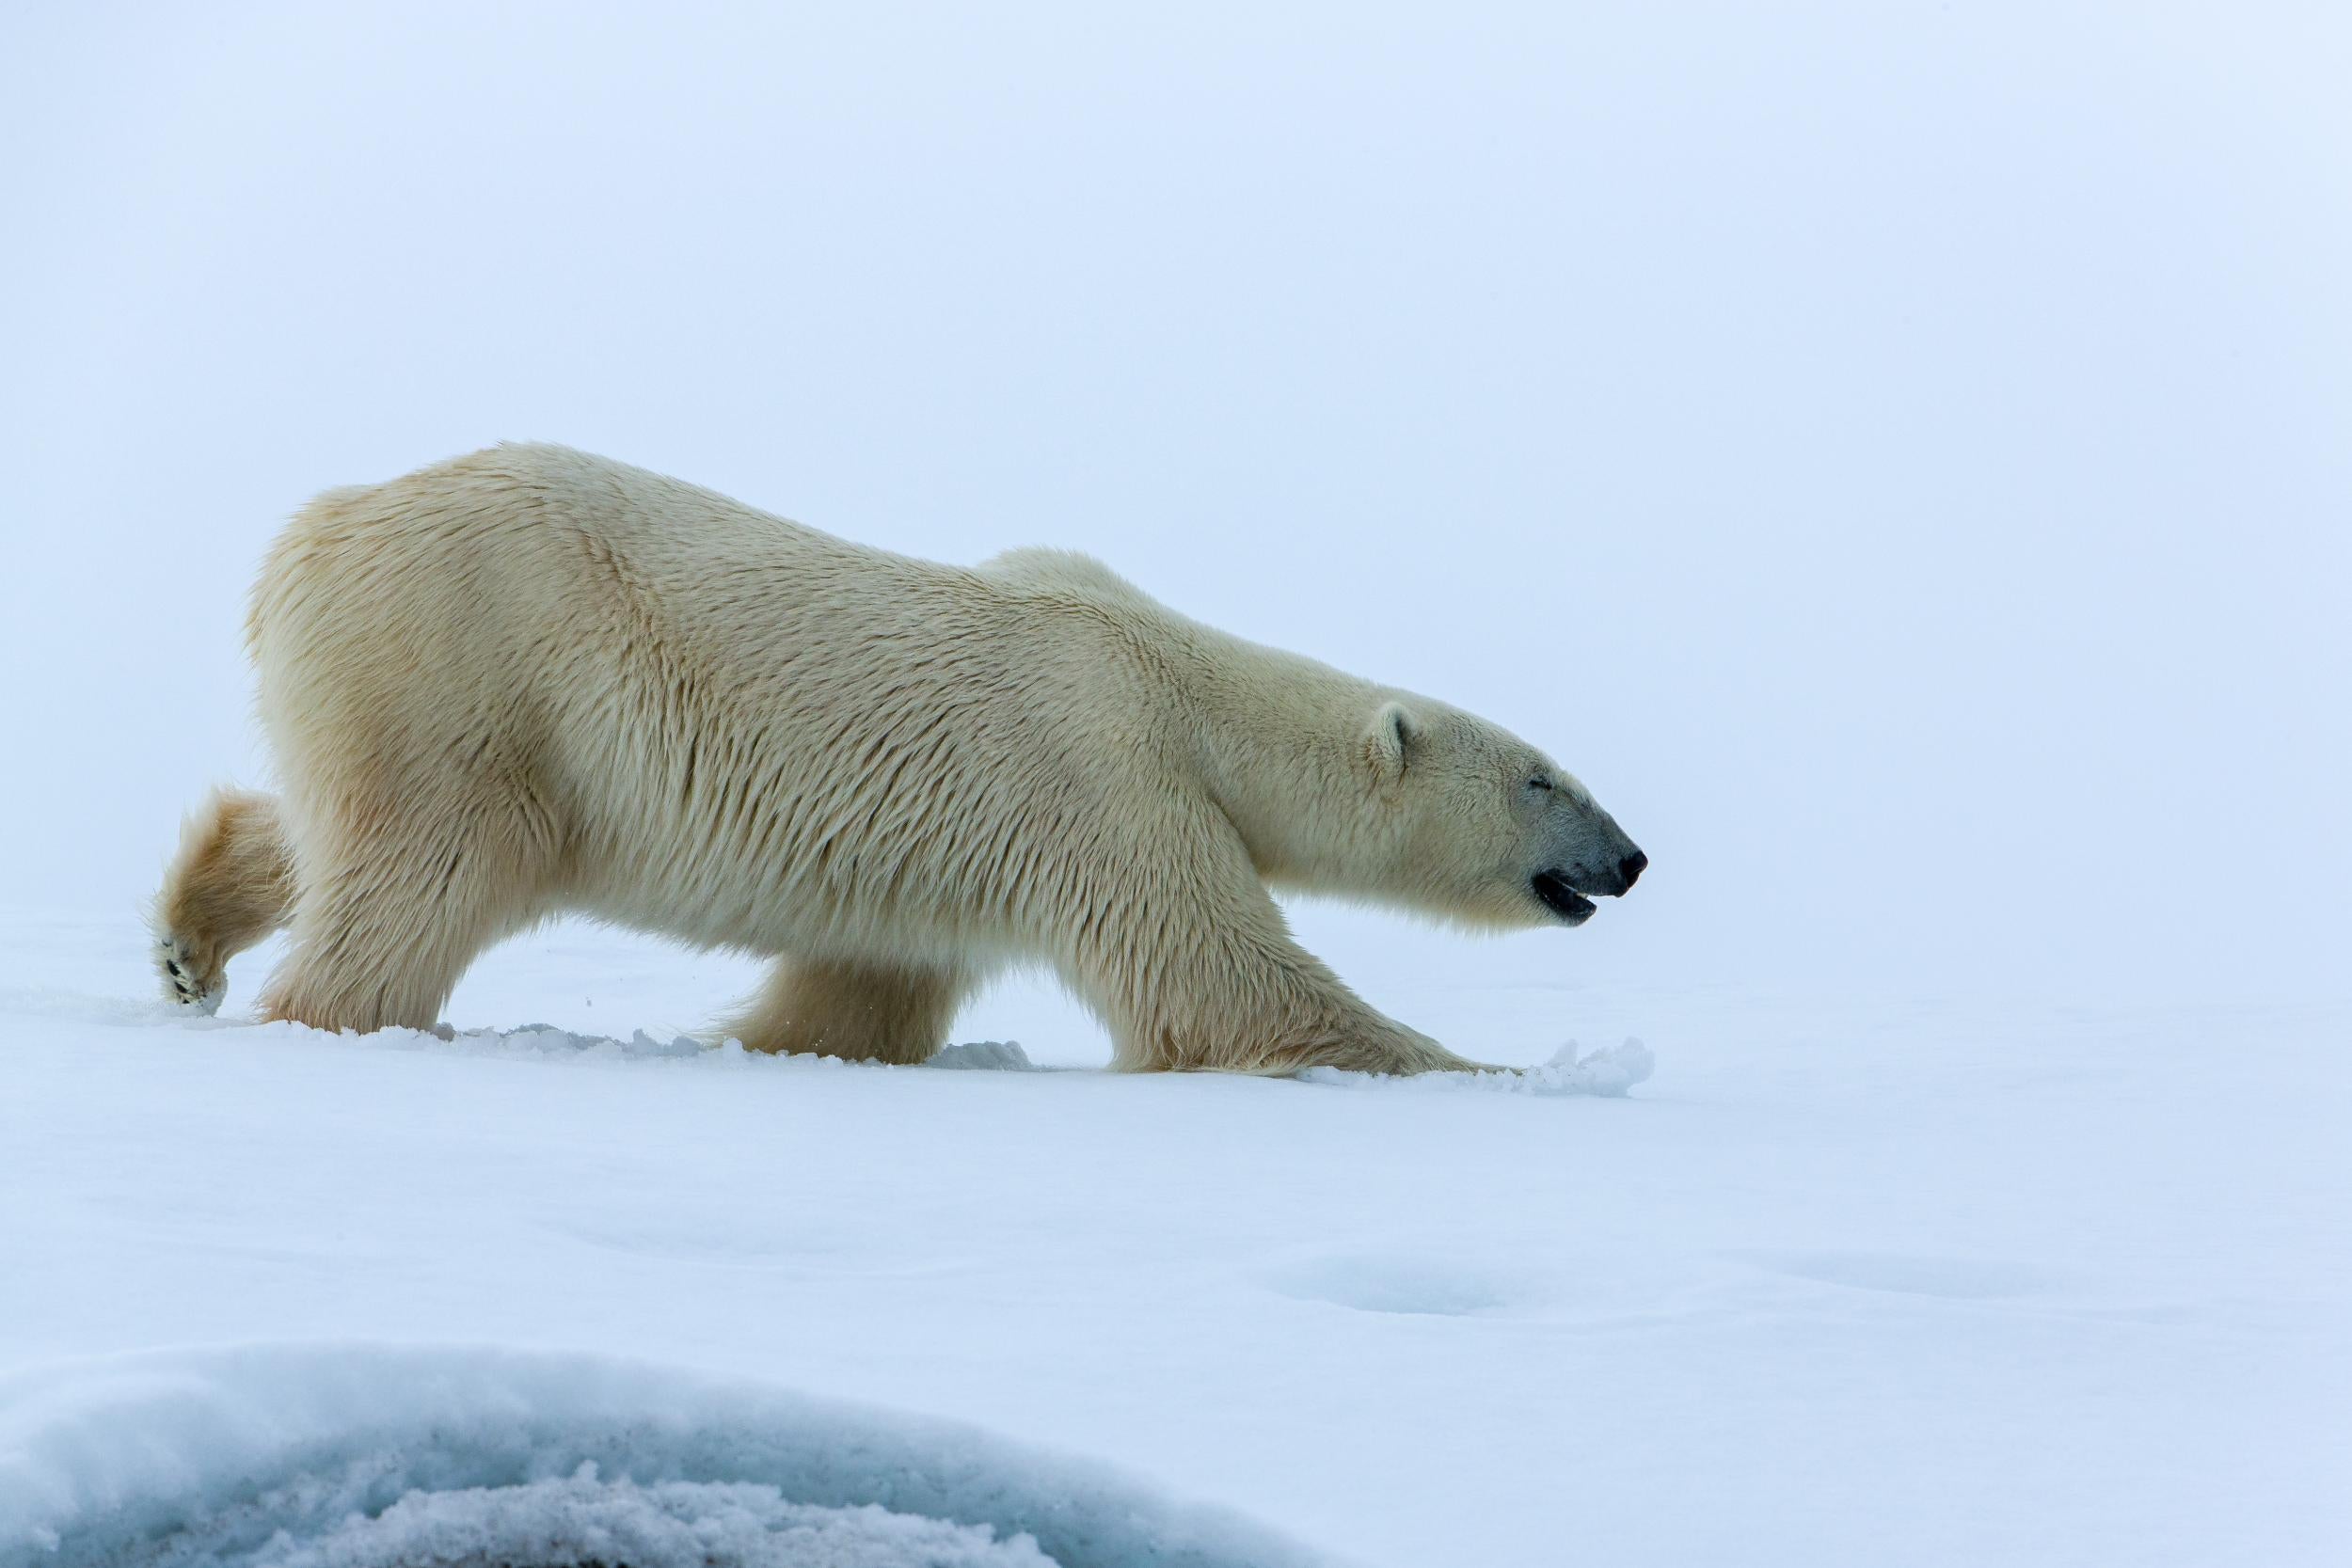 Norway’s Svalbard archipelago is a great place to spot polar bears